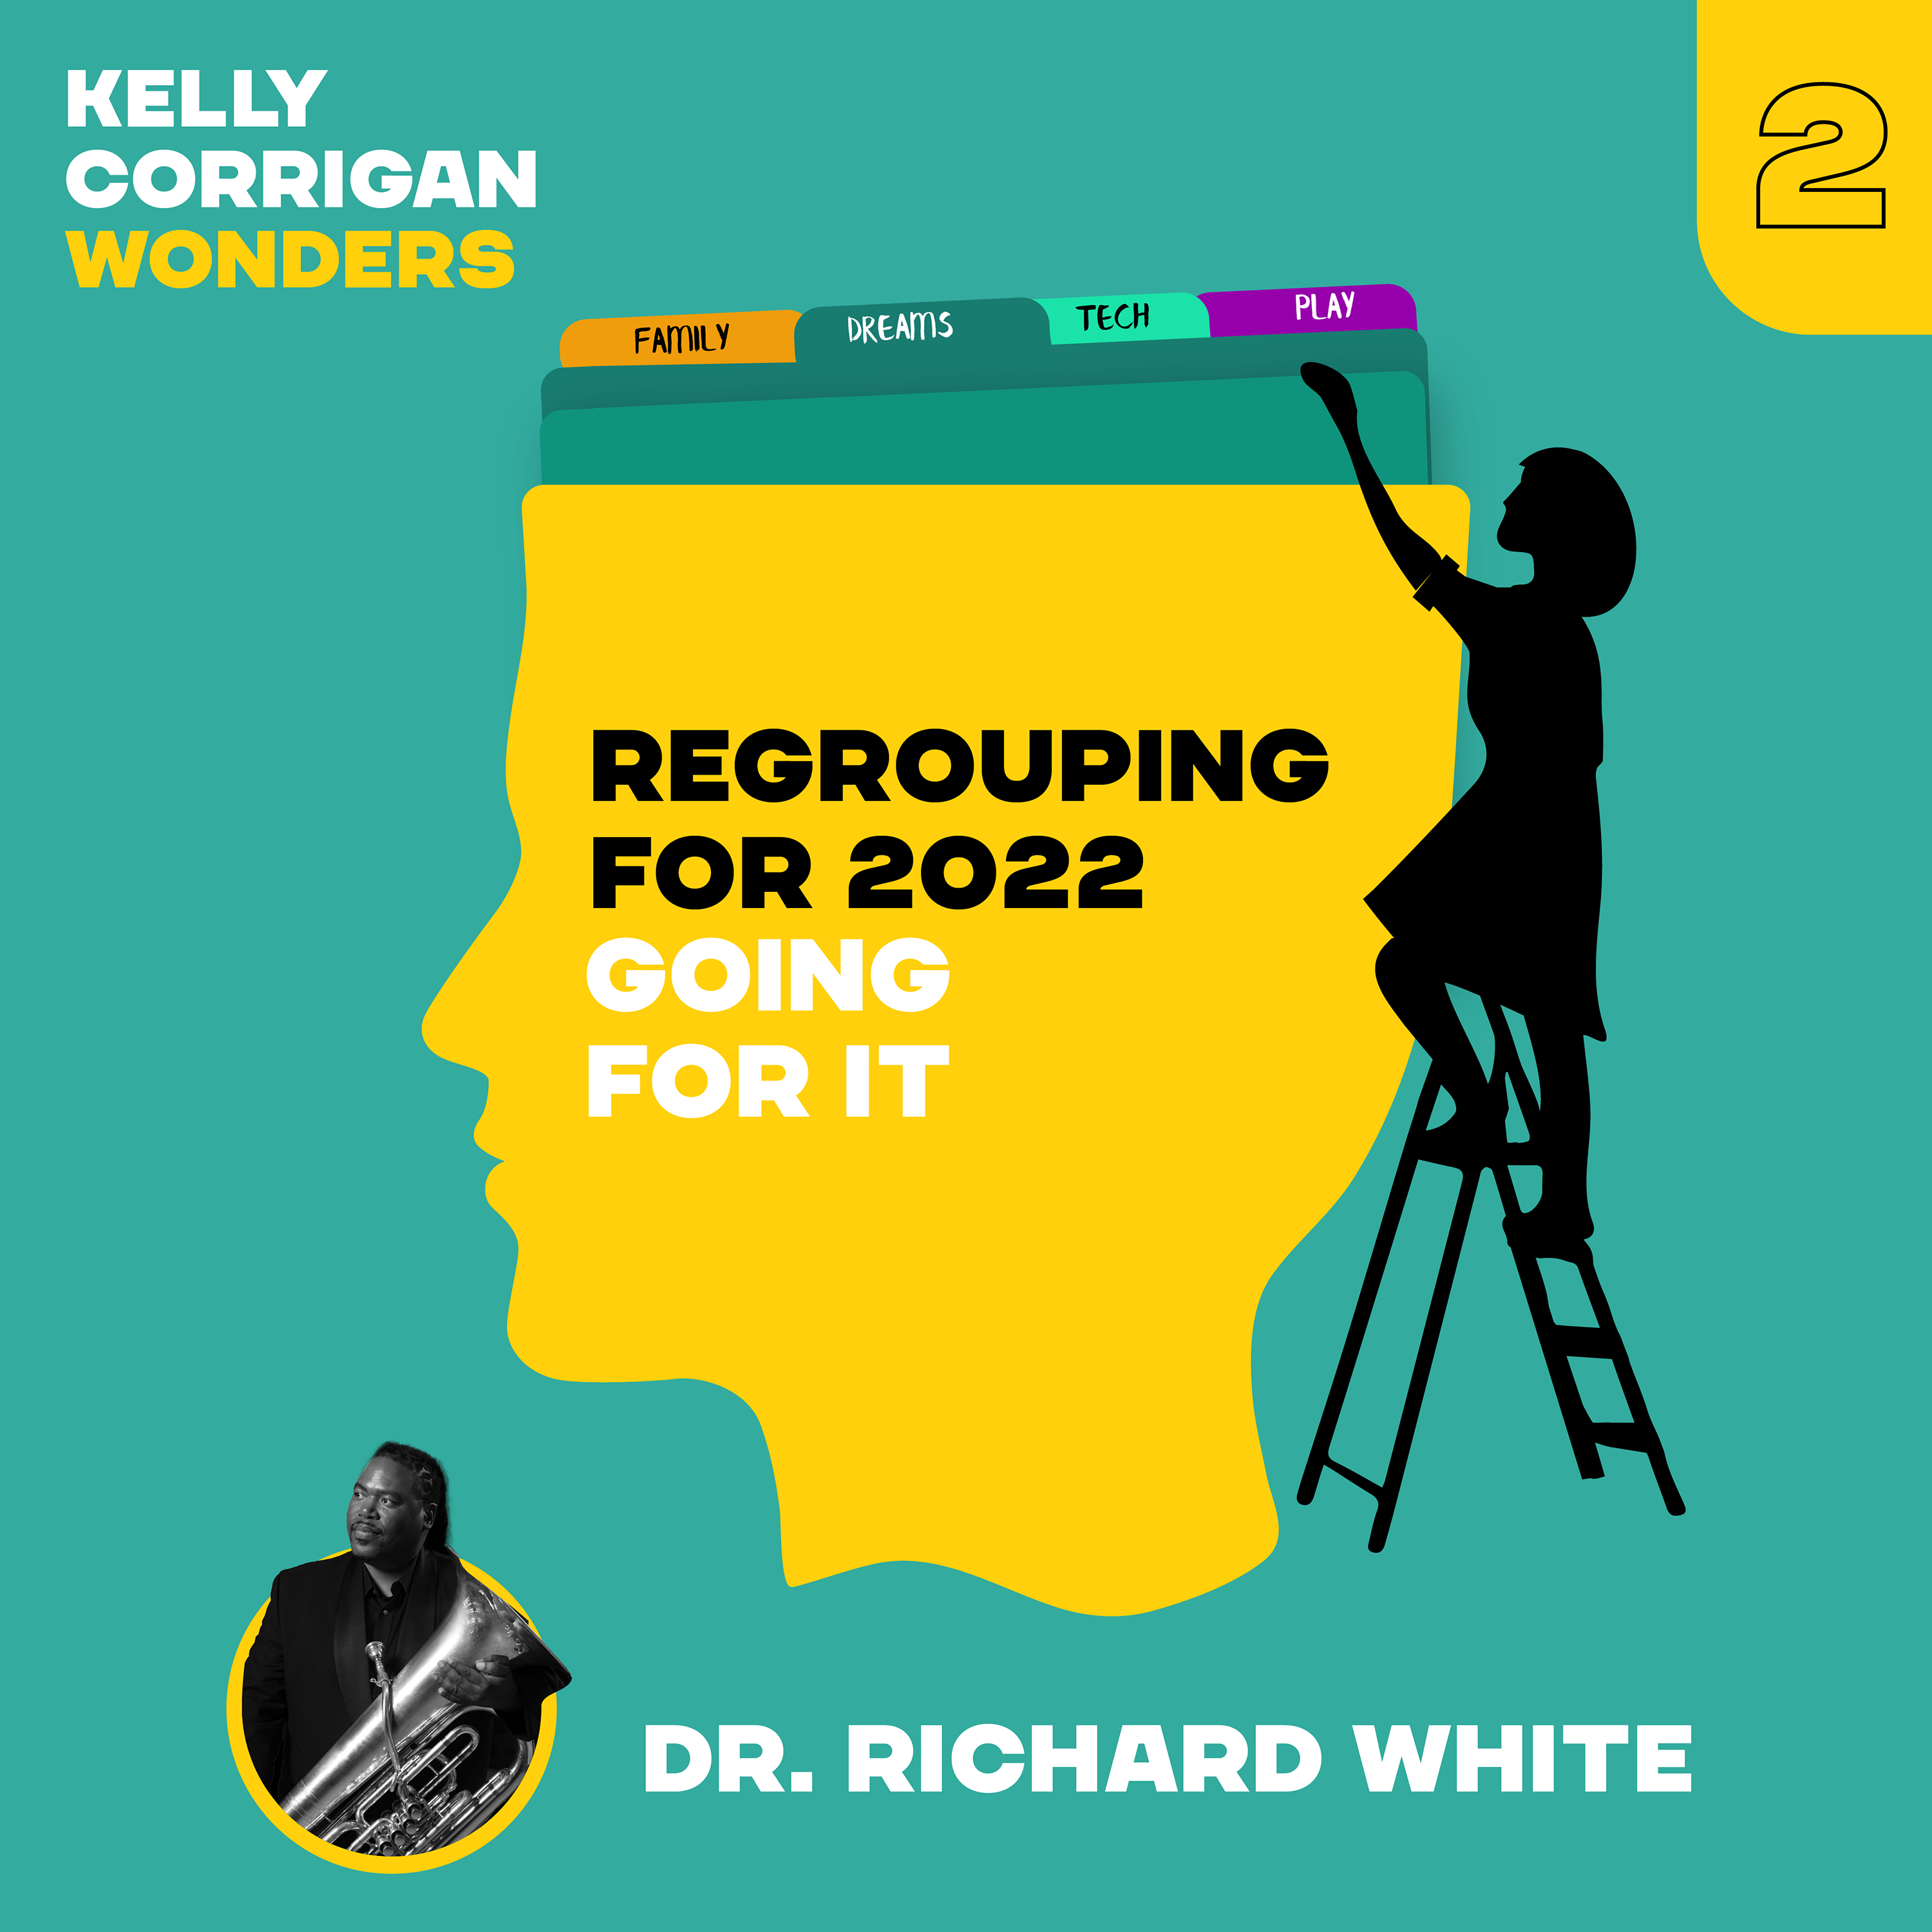 The 2022 Regroup: Going For It